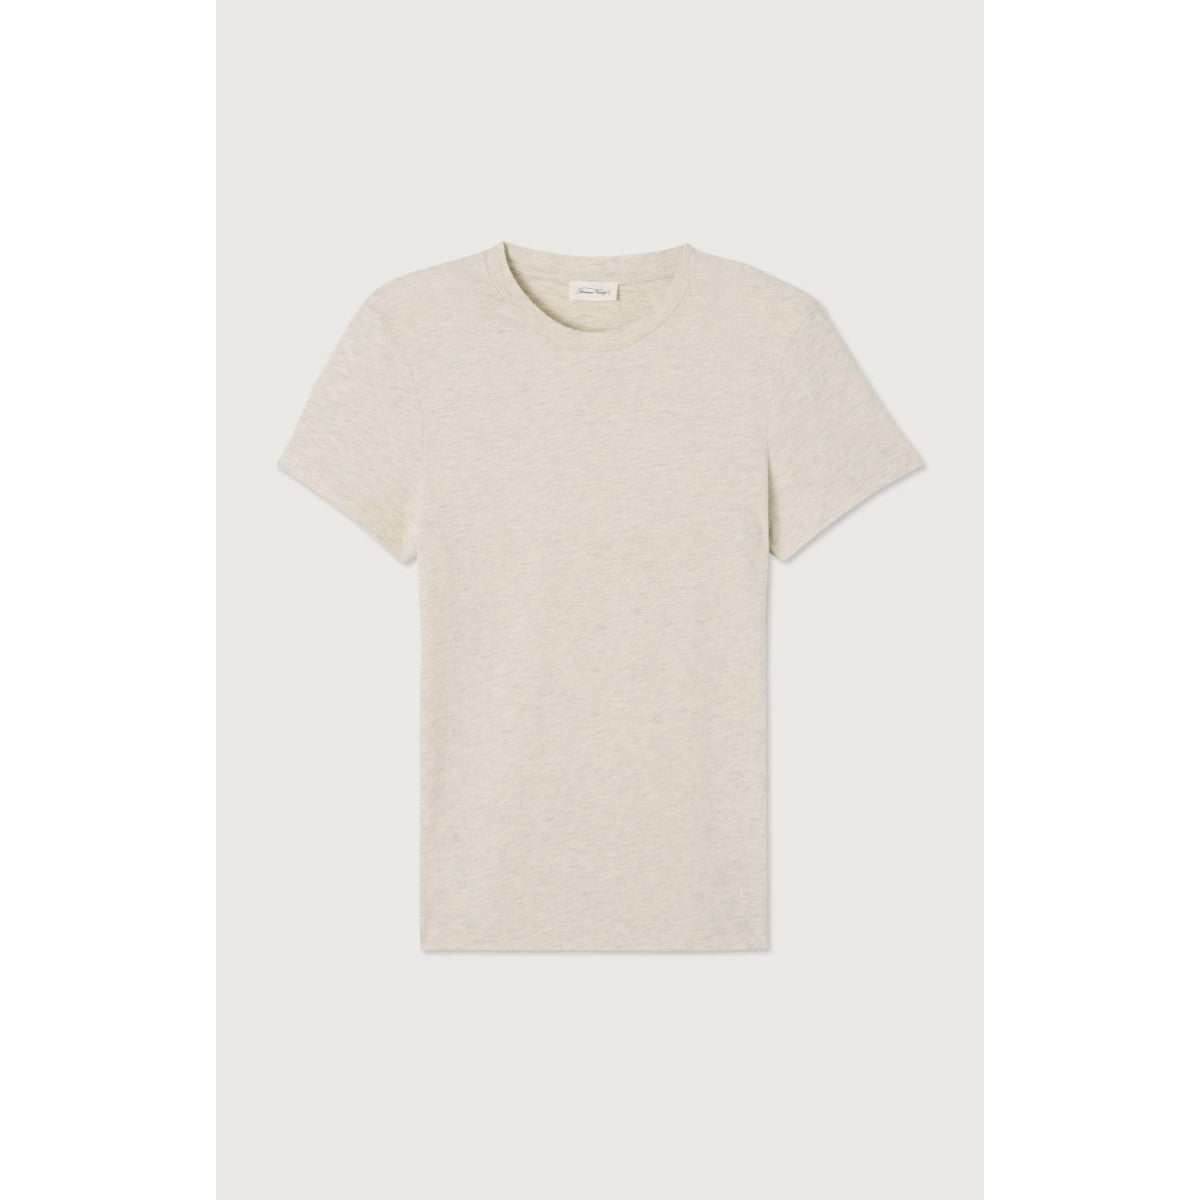 American Vintage Ypawood T-shirt Heather Grey